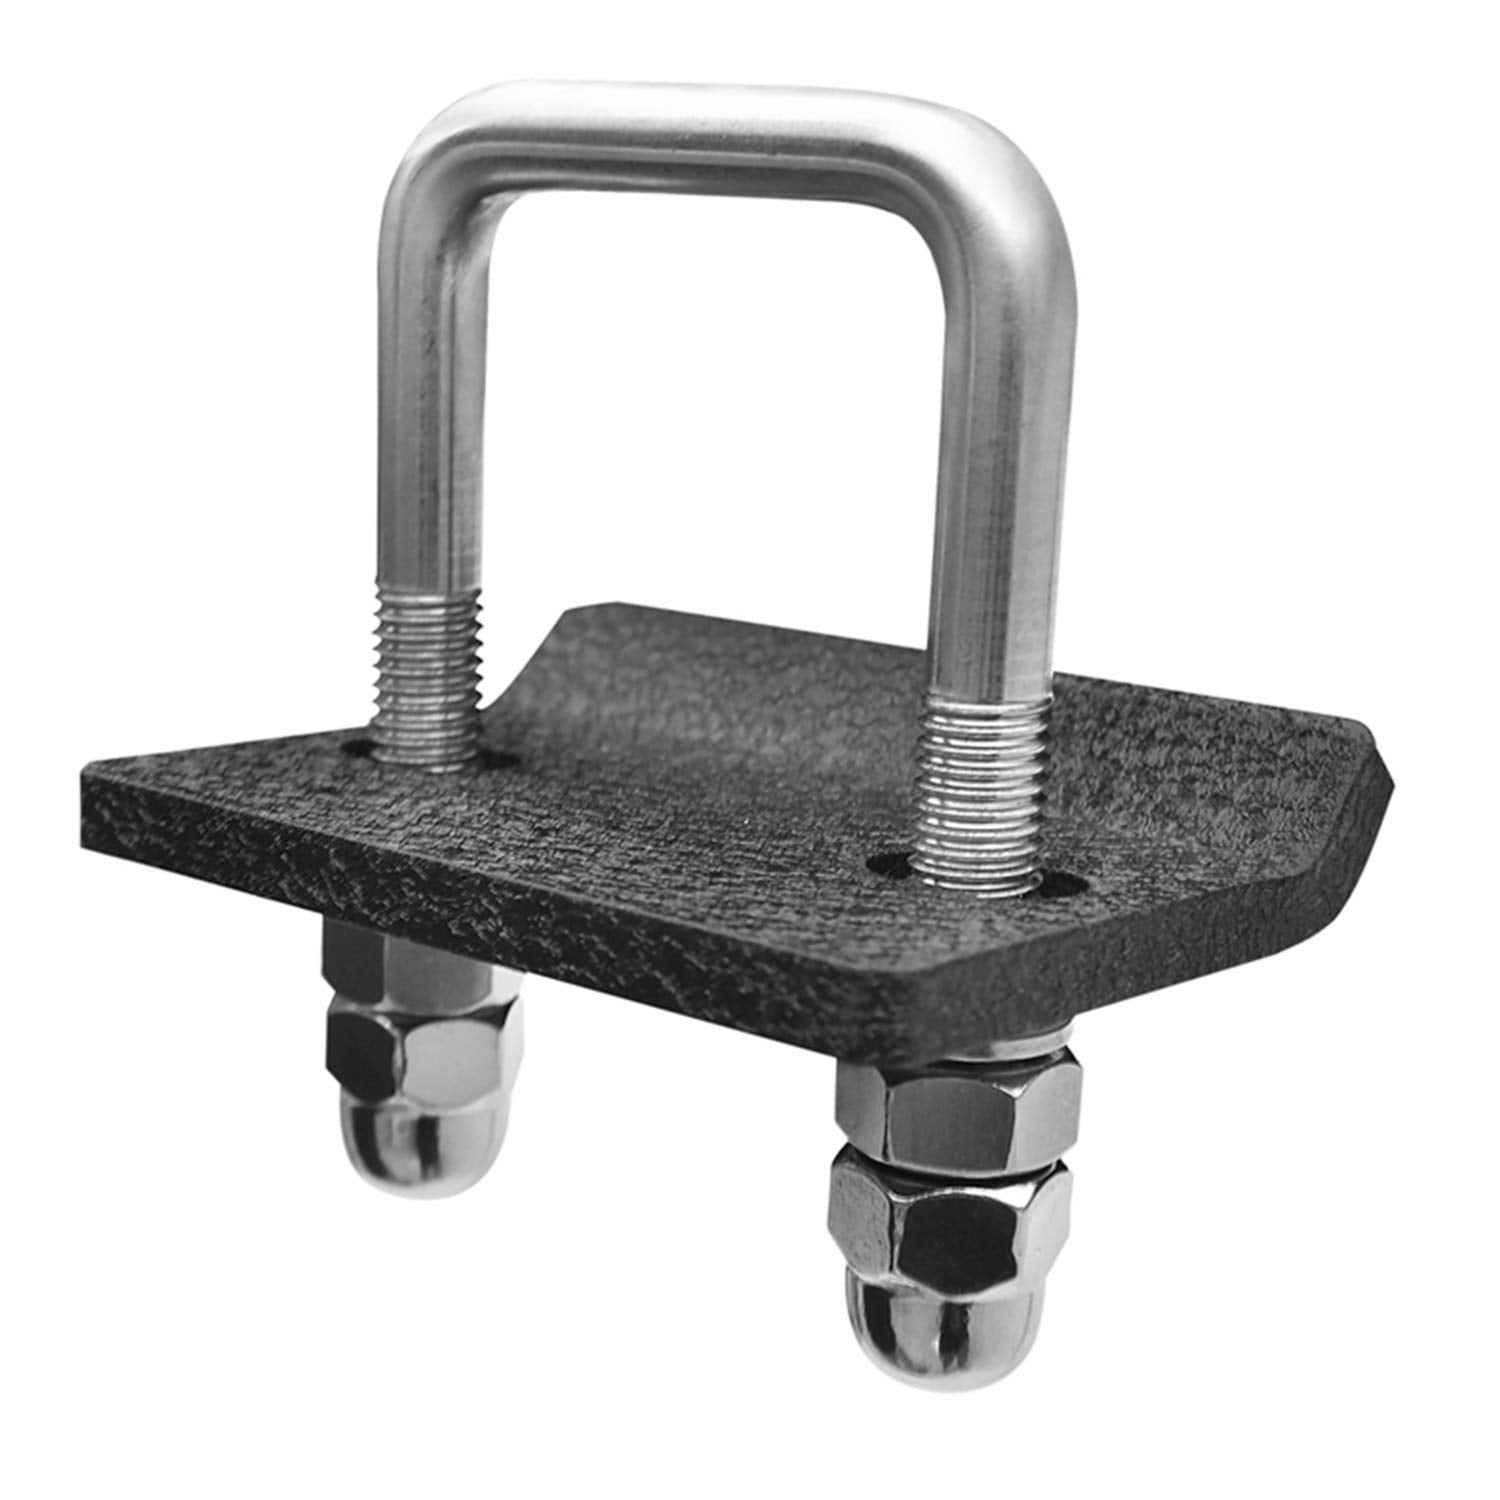 Ruedamann Hitch Tightener Stainless Steel Ball Mounts Anti-Rattle Clamp to Reduce Shaking for Cargo Carriers Blue Heavy Duty No-Rust Stabilizer for 1.25 and 2 Hitches etc Hitch Racks 